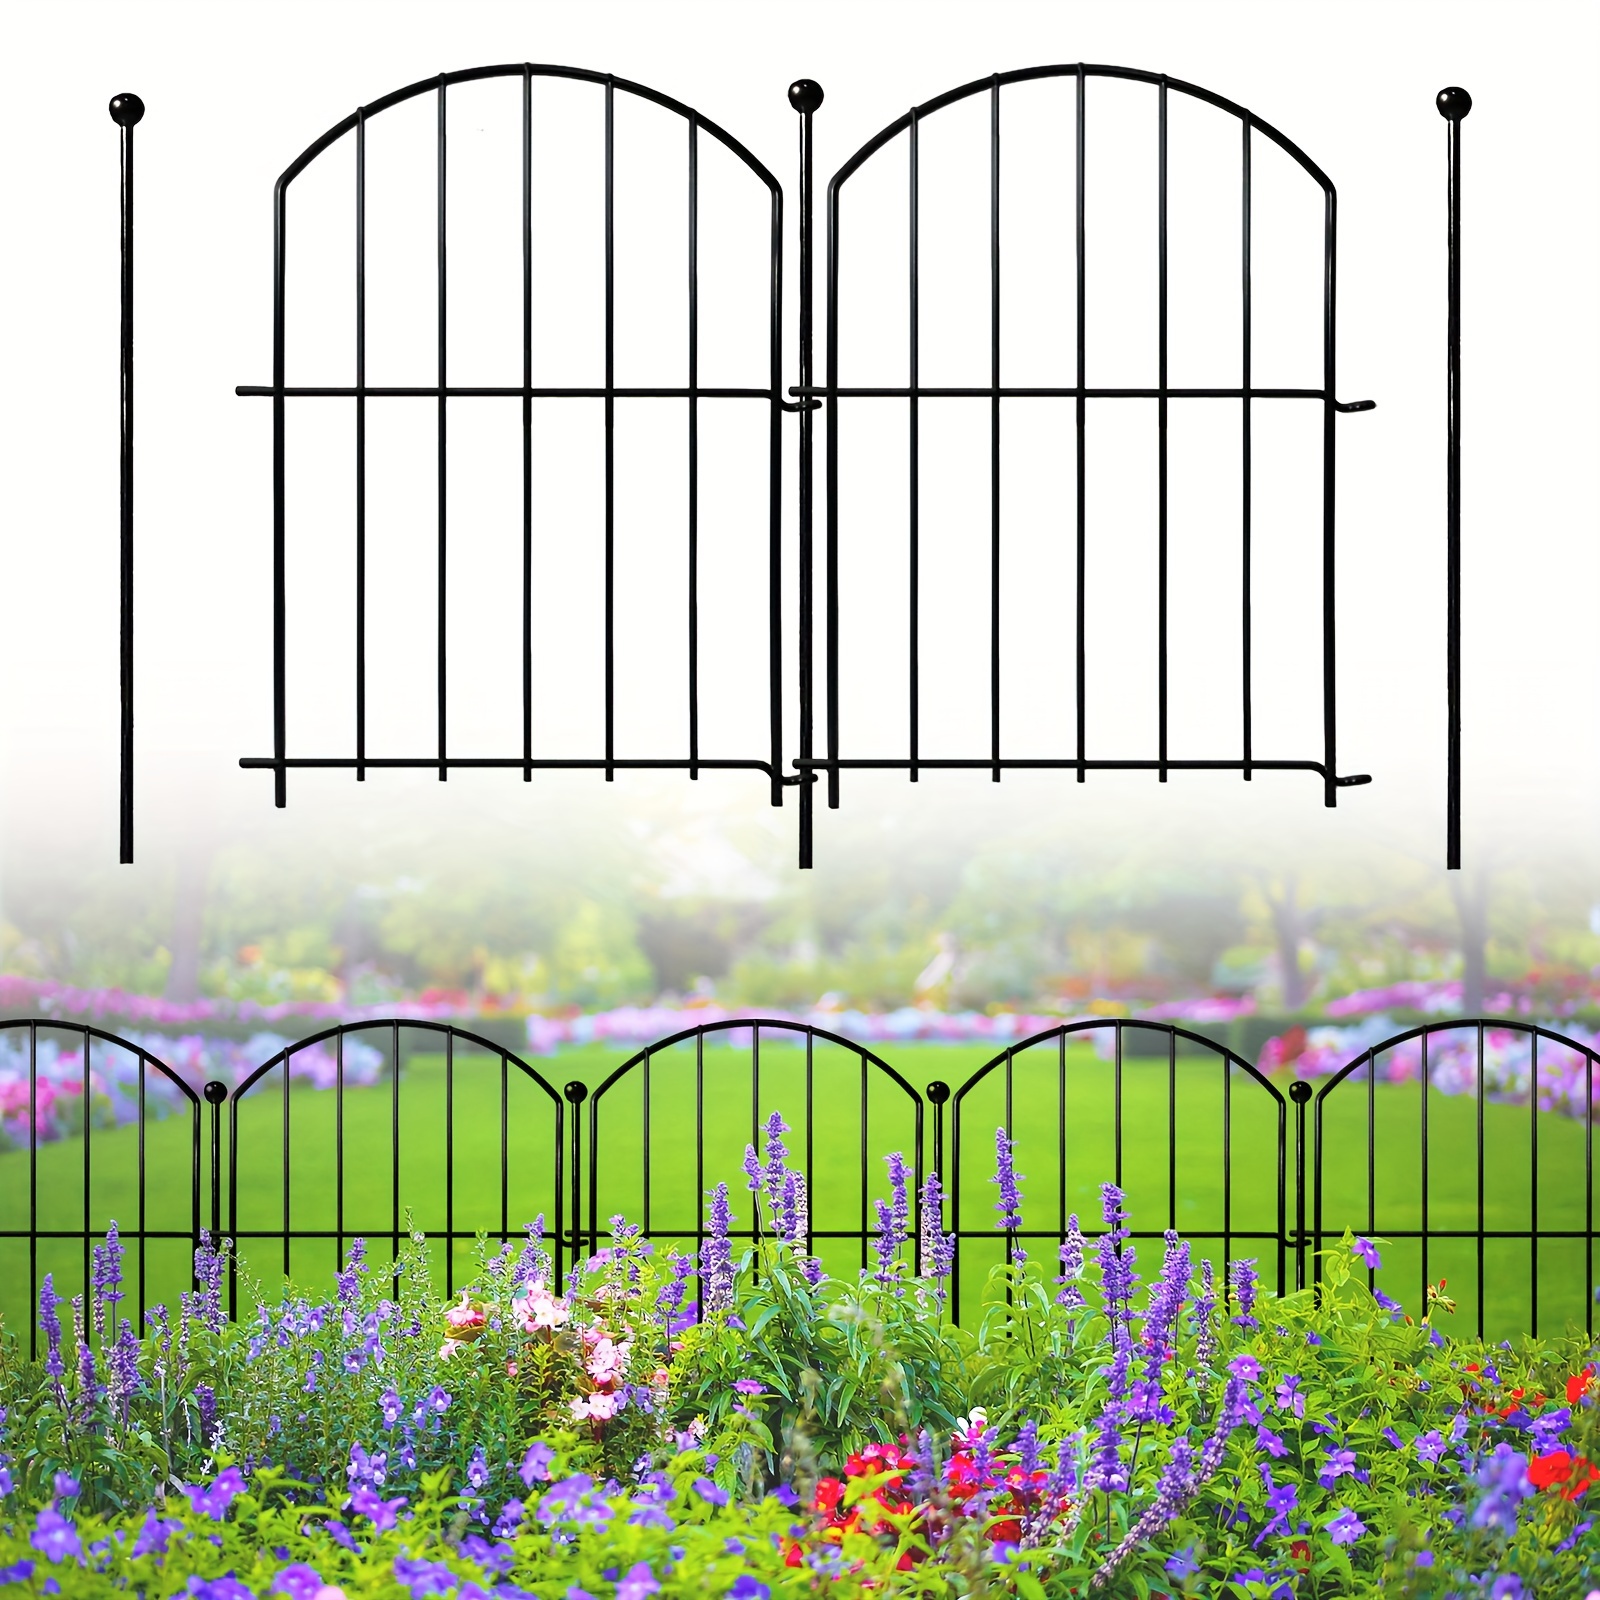 

10pcs Decorative Garden Fence, Rustproof Metal Fence Animal Barrier For Dog, Arched Flower Bed Edging Ornamental Wire Border Panel Fencing For Yard Patio Outdoor Decor, 21in X 10ft